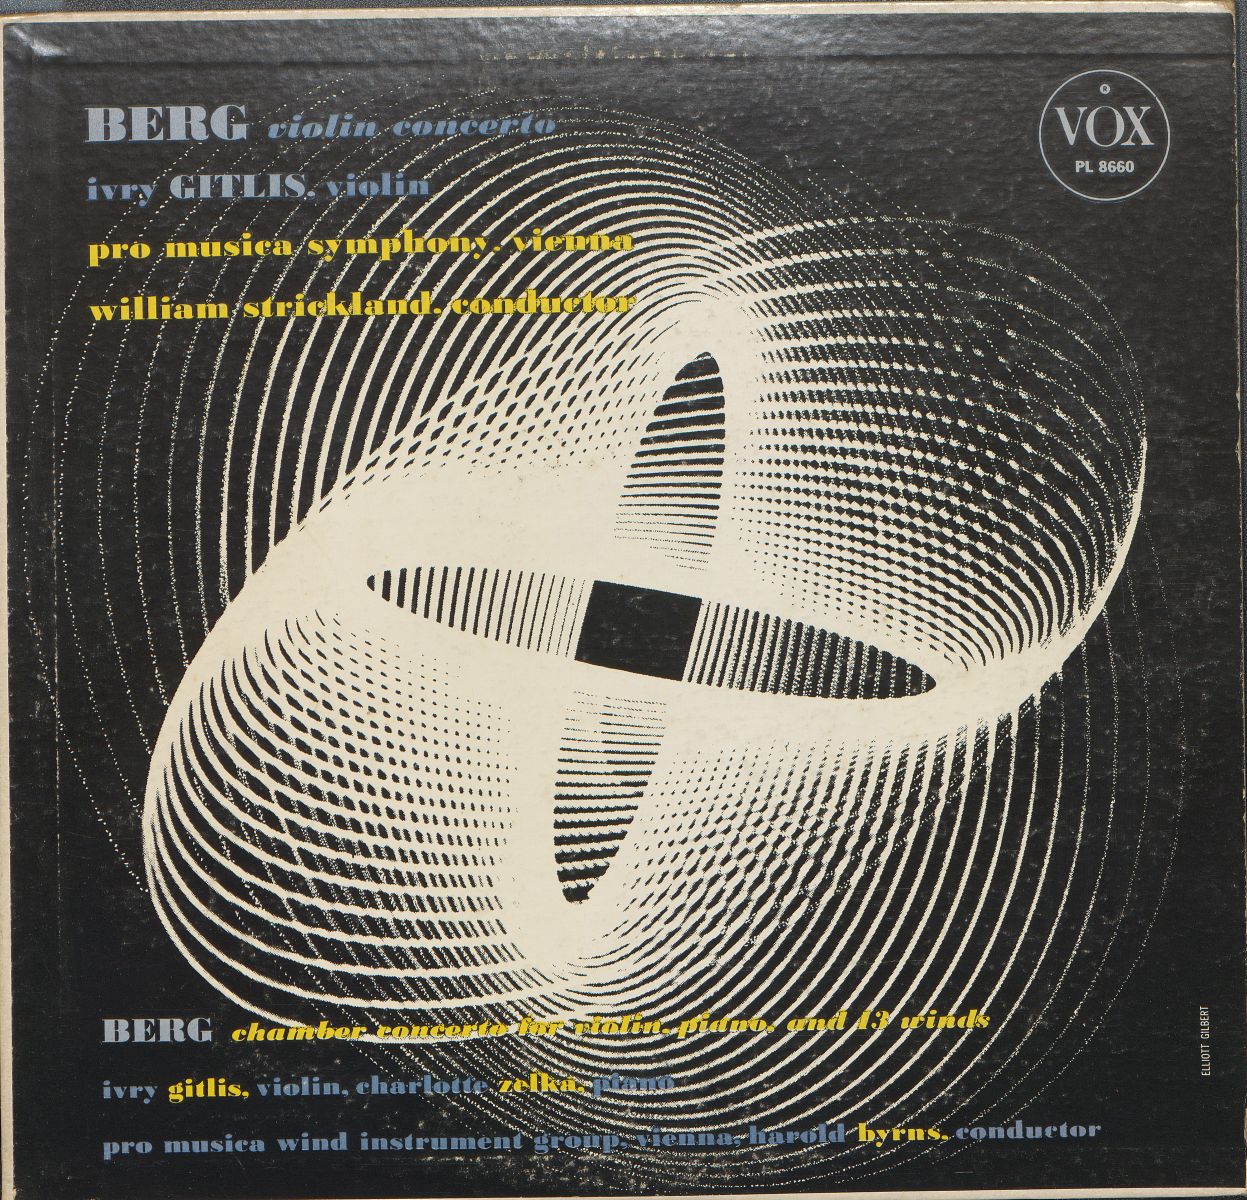 A recording of music by Alban Berg (1885-1935) with a quantum mechanics-like cover. In other words, expressionism in combination with science. Does this make sense? Stylistically this can raise questions, but historically it fits. Quantum mechanics dates from 1926, precisely the period in which Berg wrote his works. B-Bc E-LP-00171.